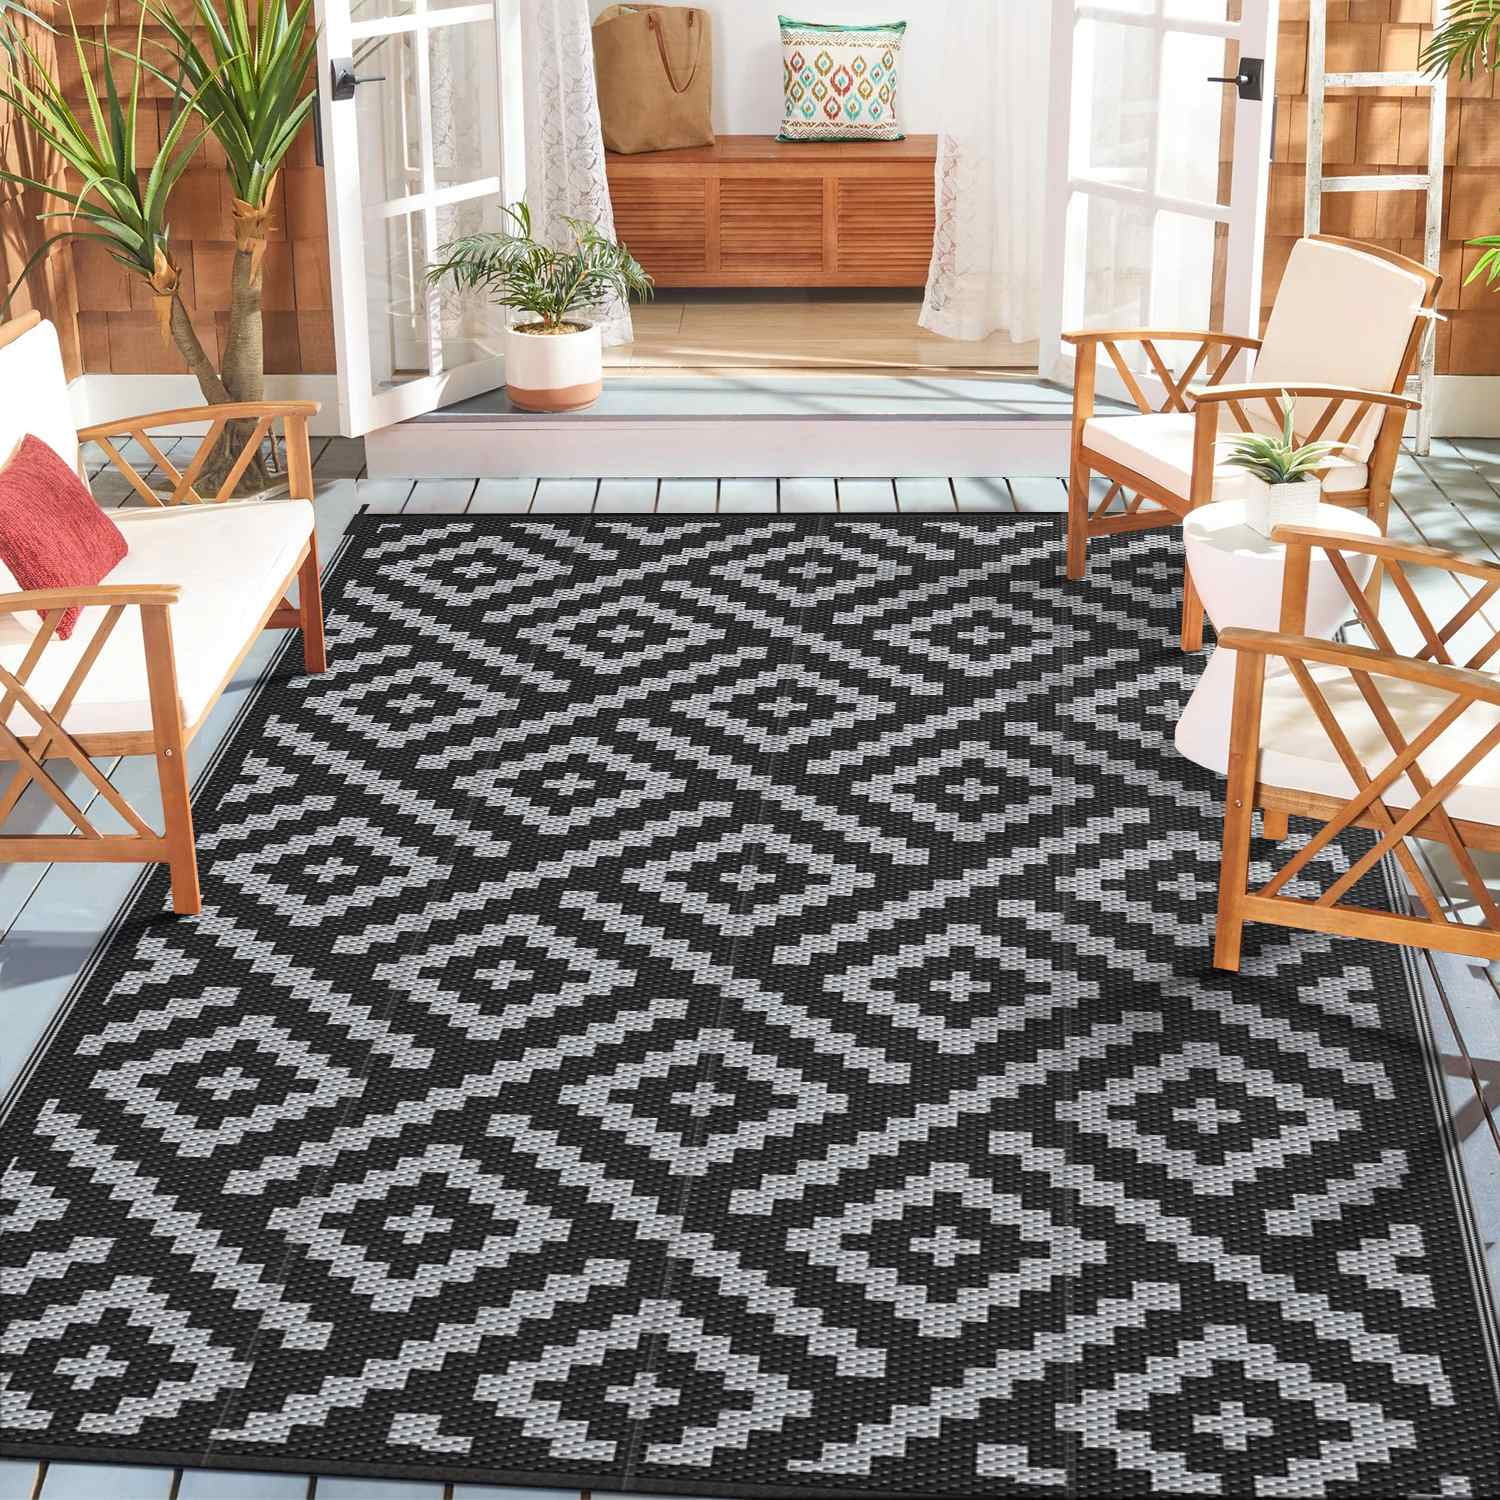 DEORAB Outdoor Rug for Patio Clearance,6'x9' Waterproof Mat